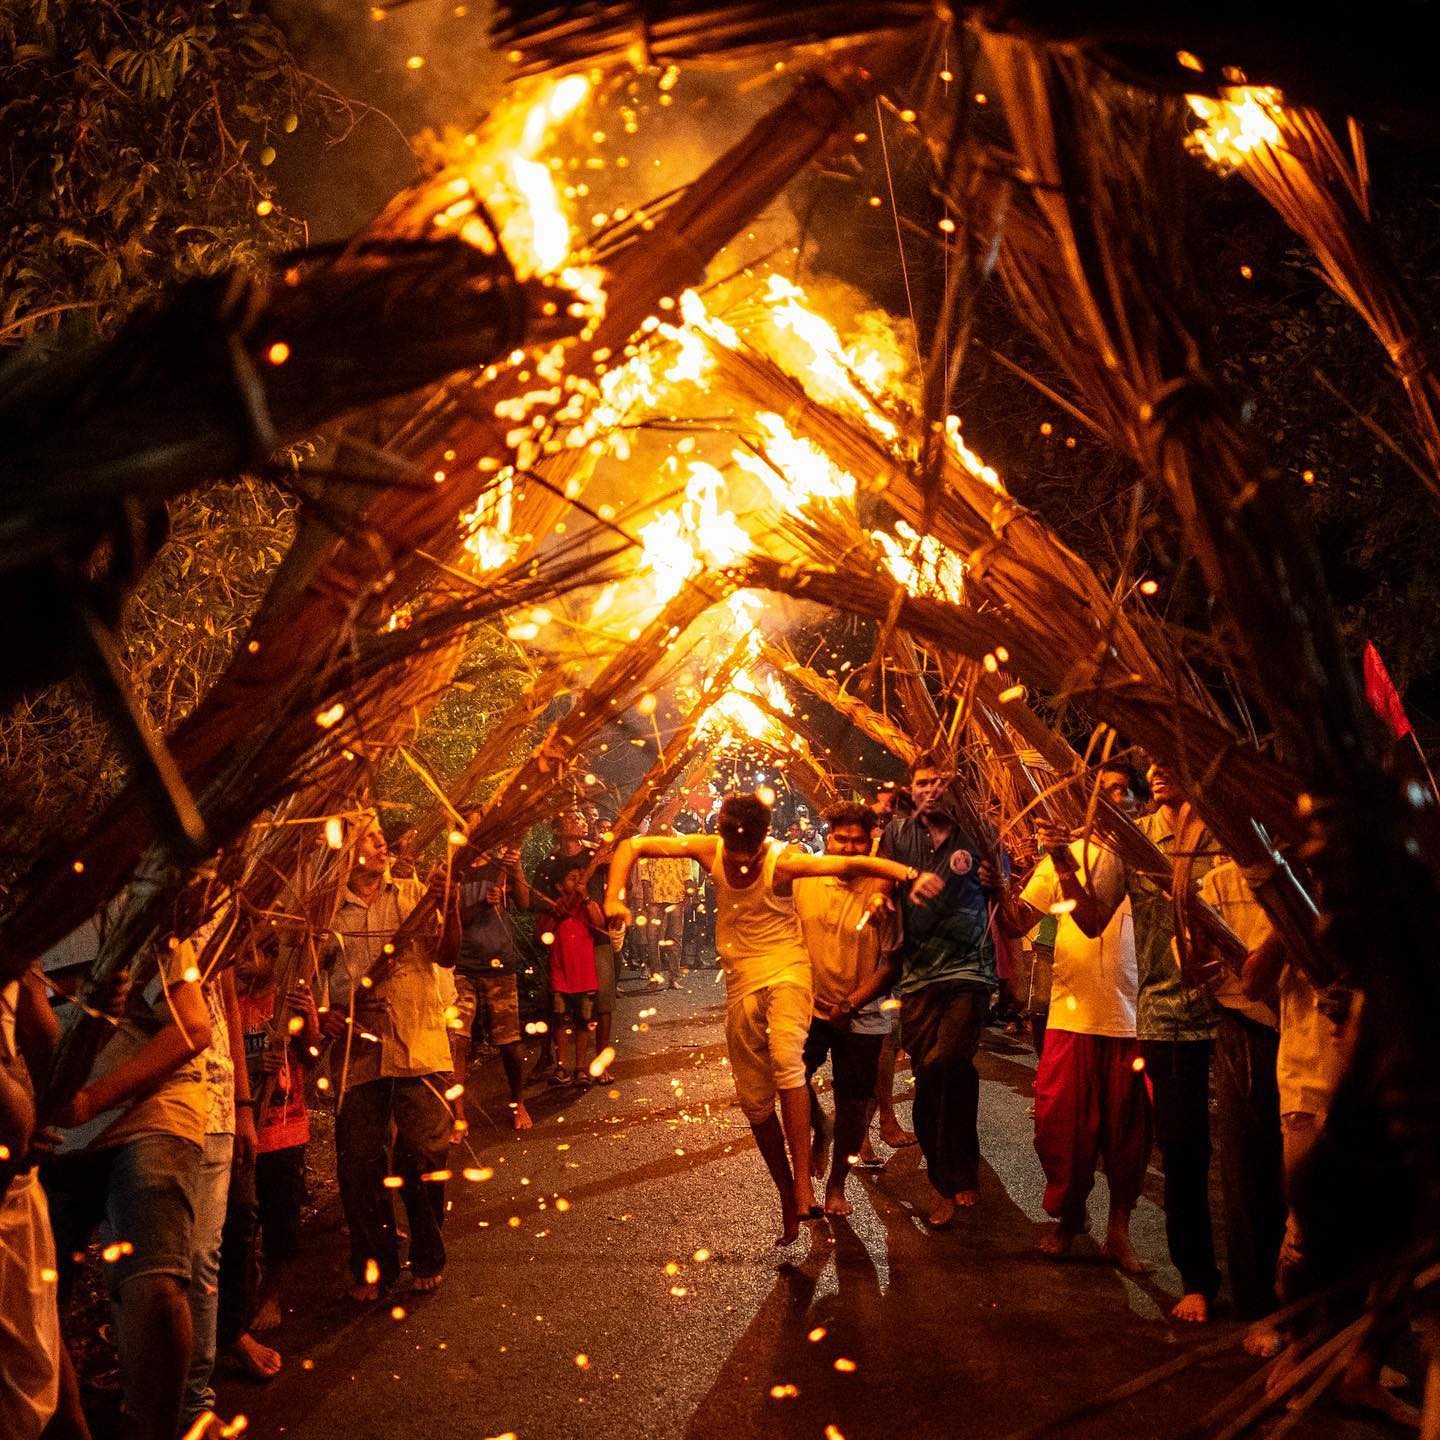 Fiery Rituals of Homkund Utsav in Charao, a Spectacle of Devotion and Tradition